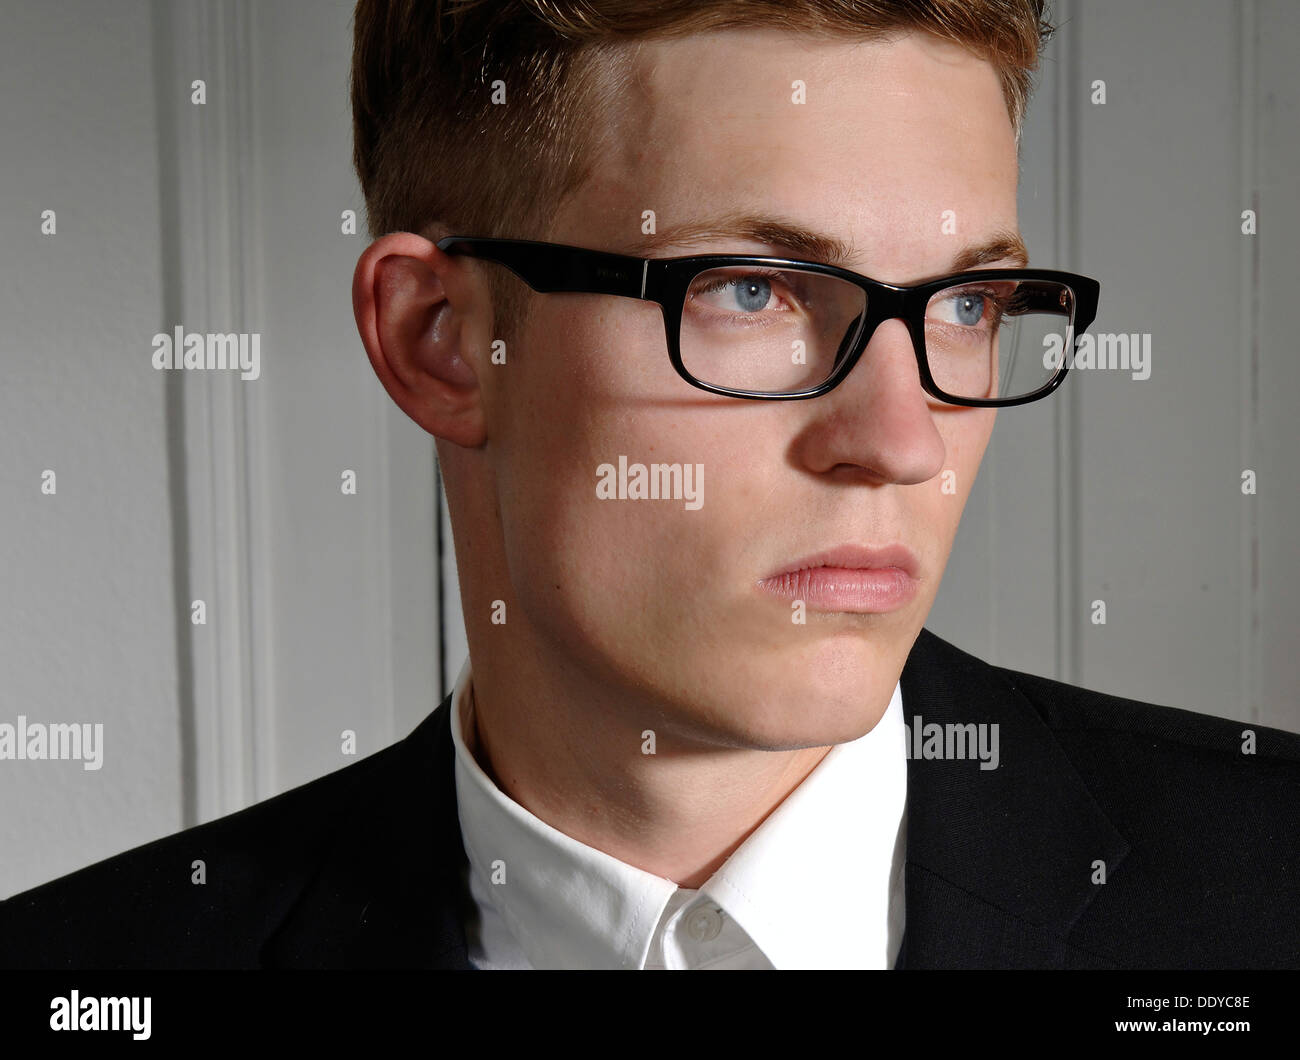 Young man wearing a suit and glasses, portrait Stock Photo - Alamy